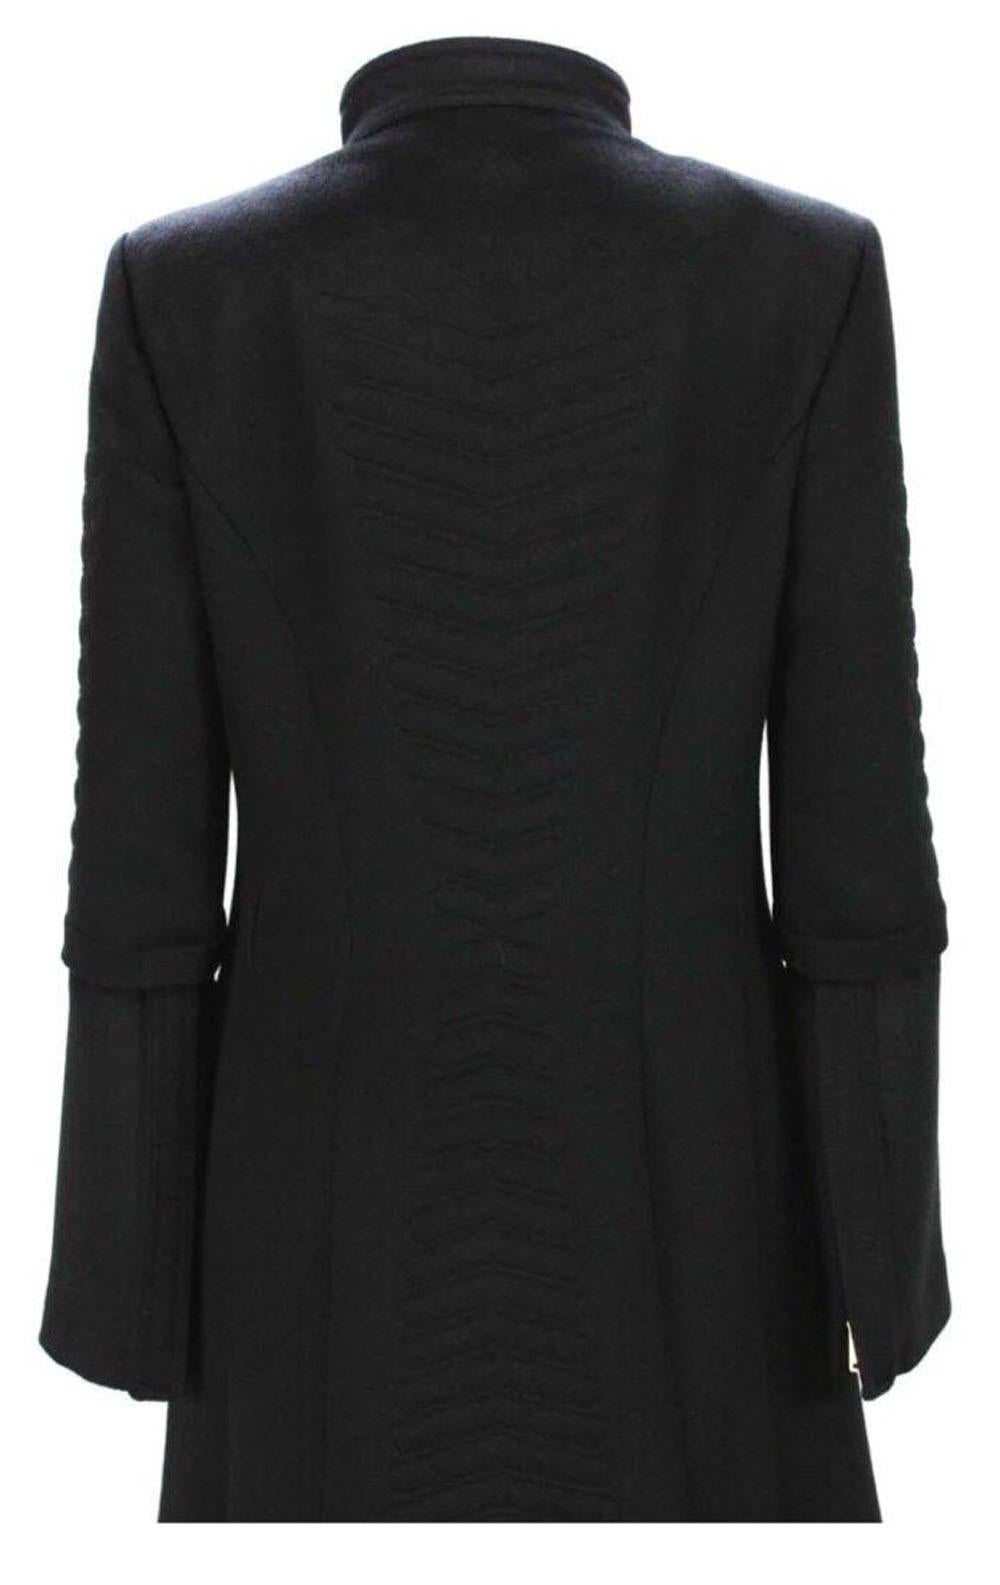 Tom Ford for Gucci F/W 2004 Black Angora Wool Chevron Pattern Coat with Belt  42 For Sale 1